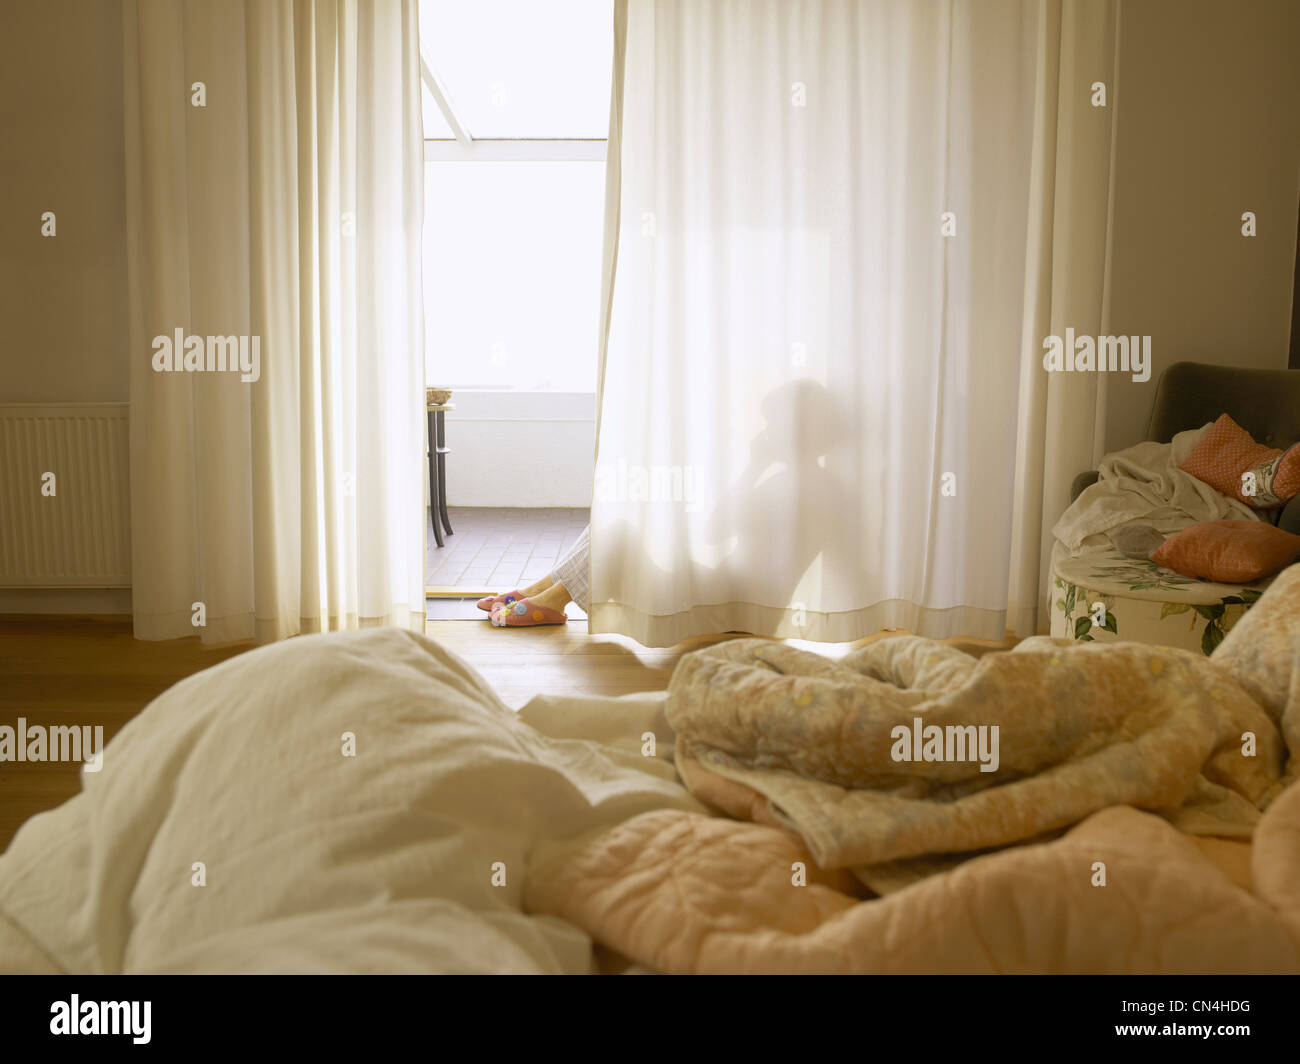 Mature woman sitting behind bedroom curtains Stock Photo